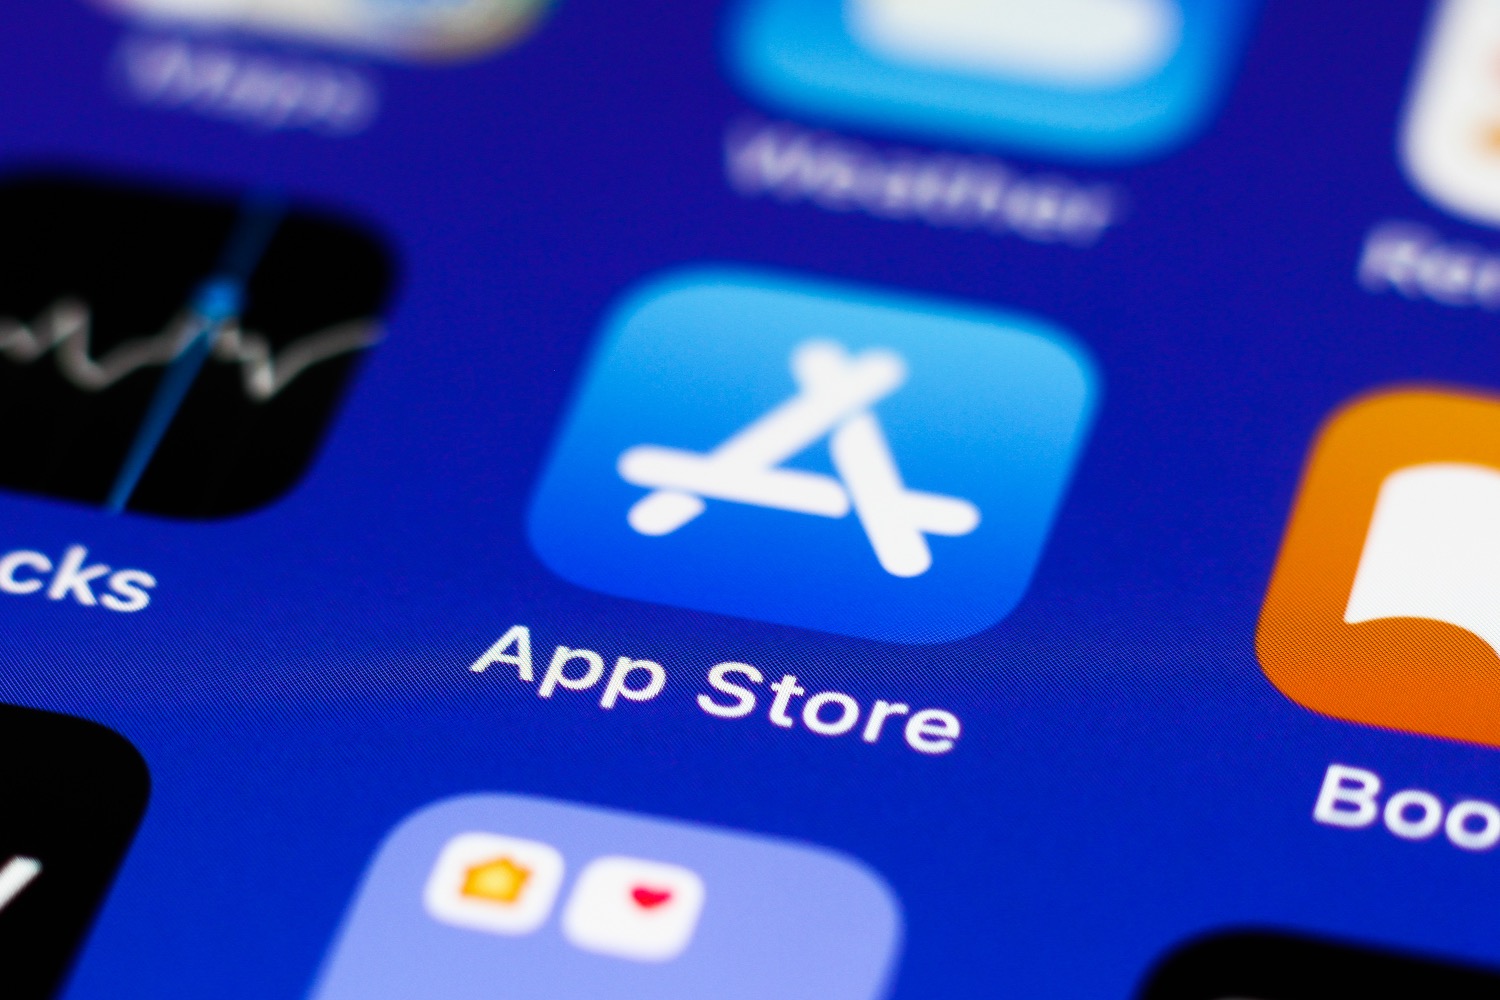 Apple will finally let devs tell users about non-App Store purchase options  | Ars Technica